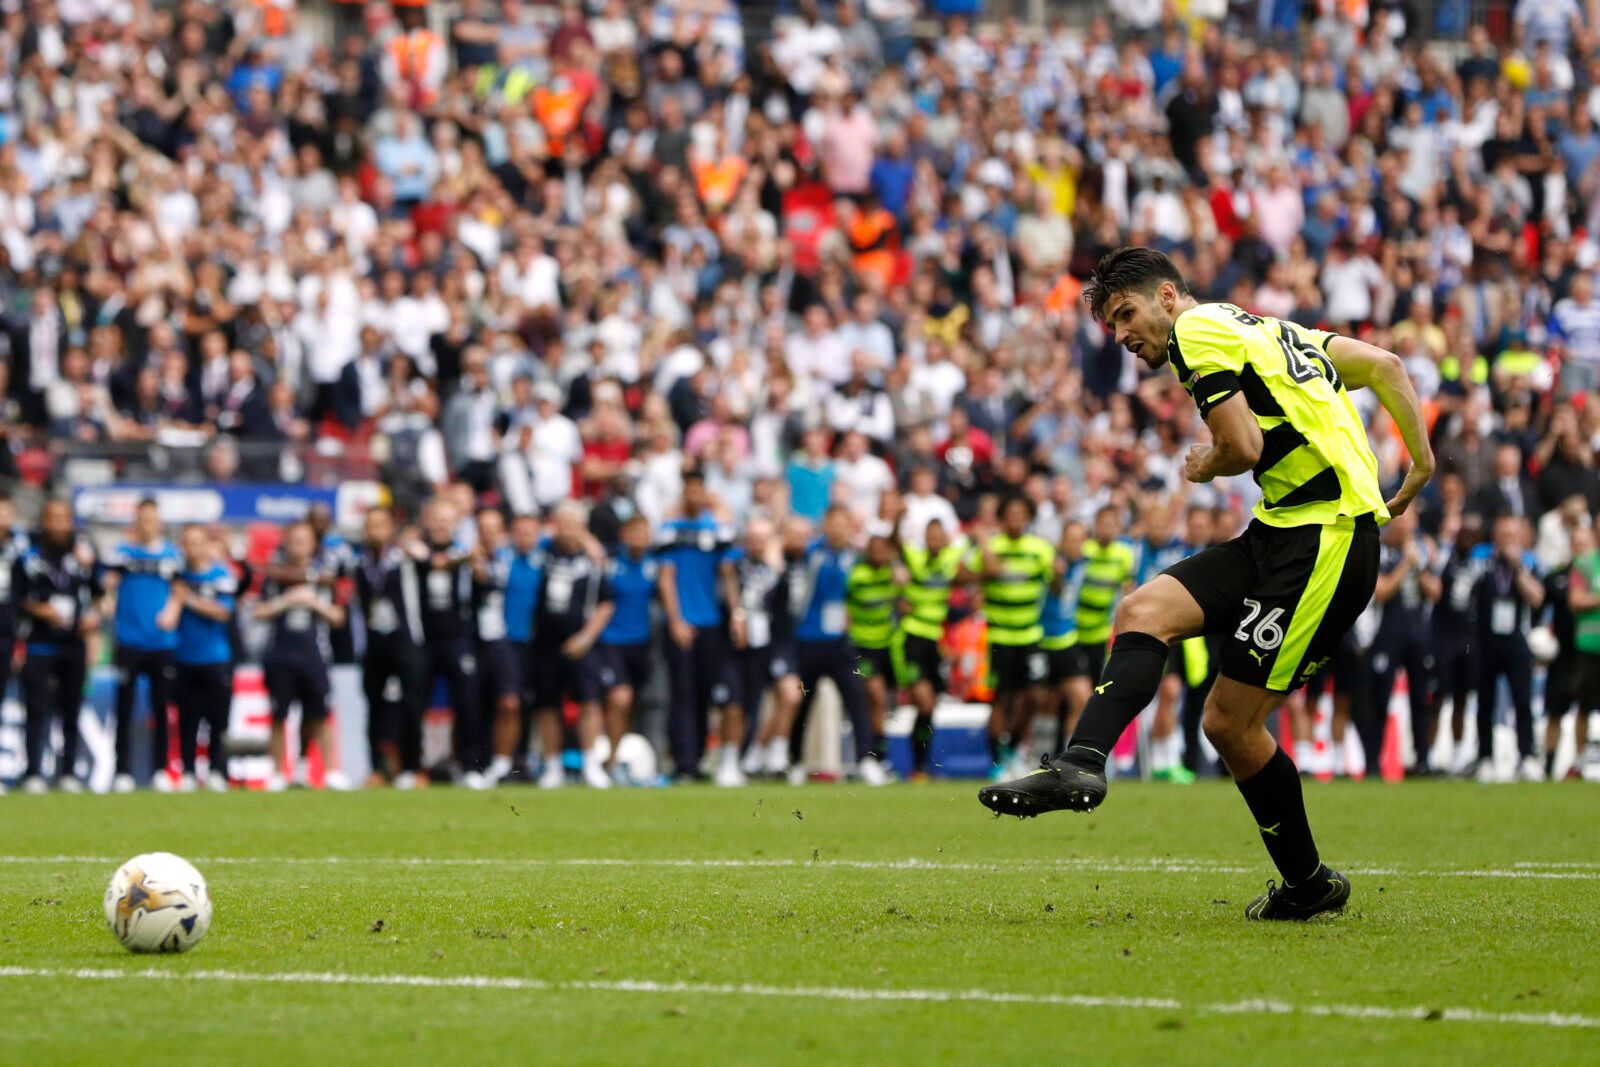 Britain Football Soccer - Reading v Huddersfield Town - Sky Bet Championship Play-Off Final - Wembley Stadium, London, England - 29/5/17 Huddersfield Town's Christopher Schindler scores a penalty to win the penalty shootout and get promoted to the Premier League  Action Images via Reuters / John Sibley Livepic EDITORIAL USE ONLY. No use with unauthorized audio, video, data, fixture lists, club/league logos or 